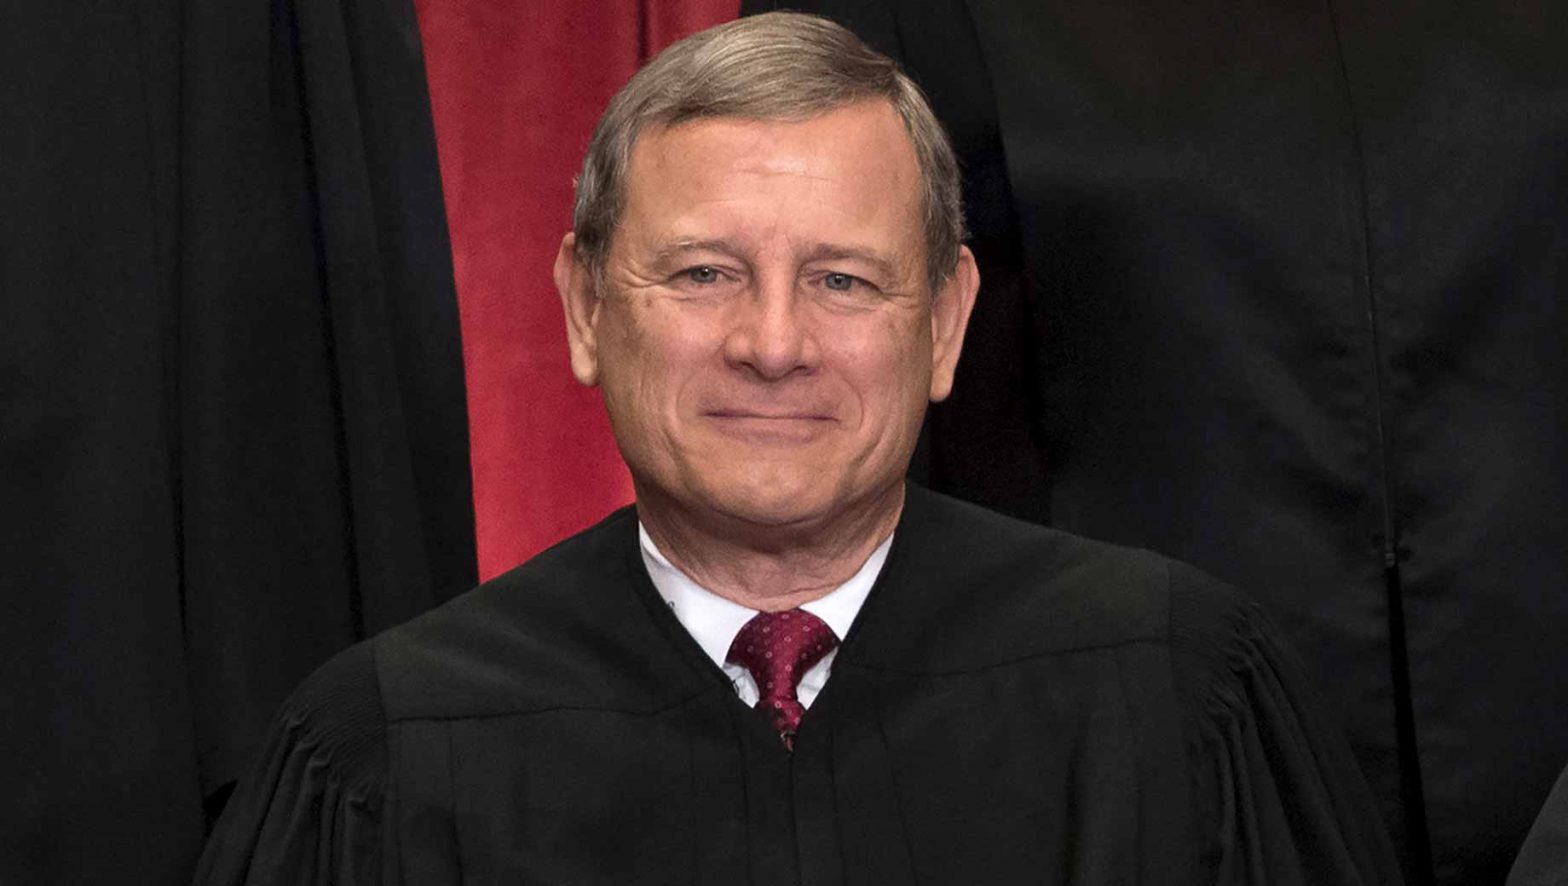 Chief Justice Says In-Person Oral Arguments Will Resume in October